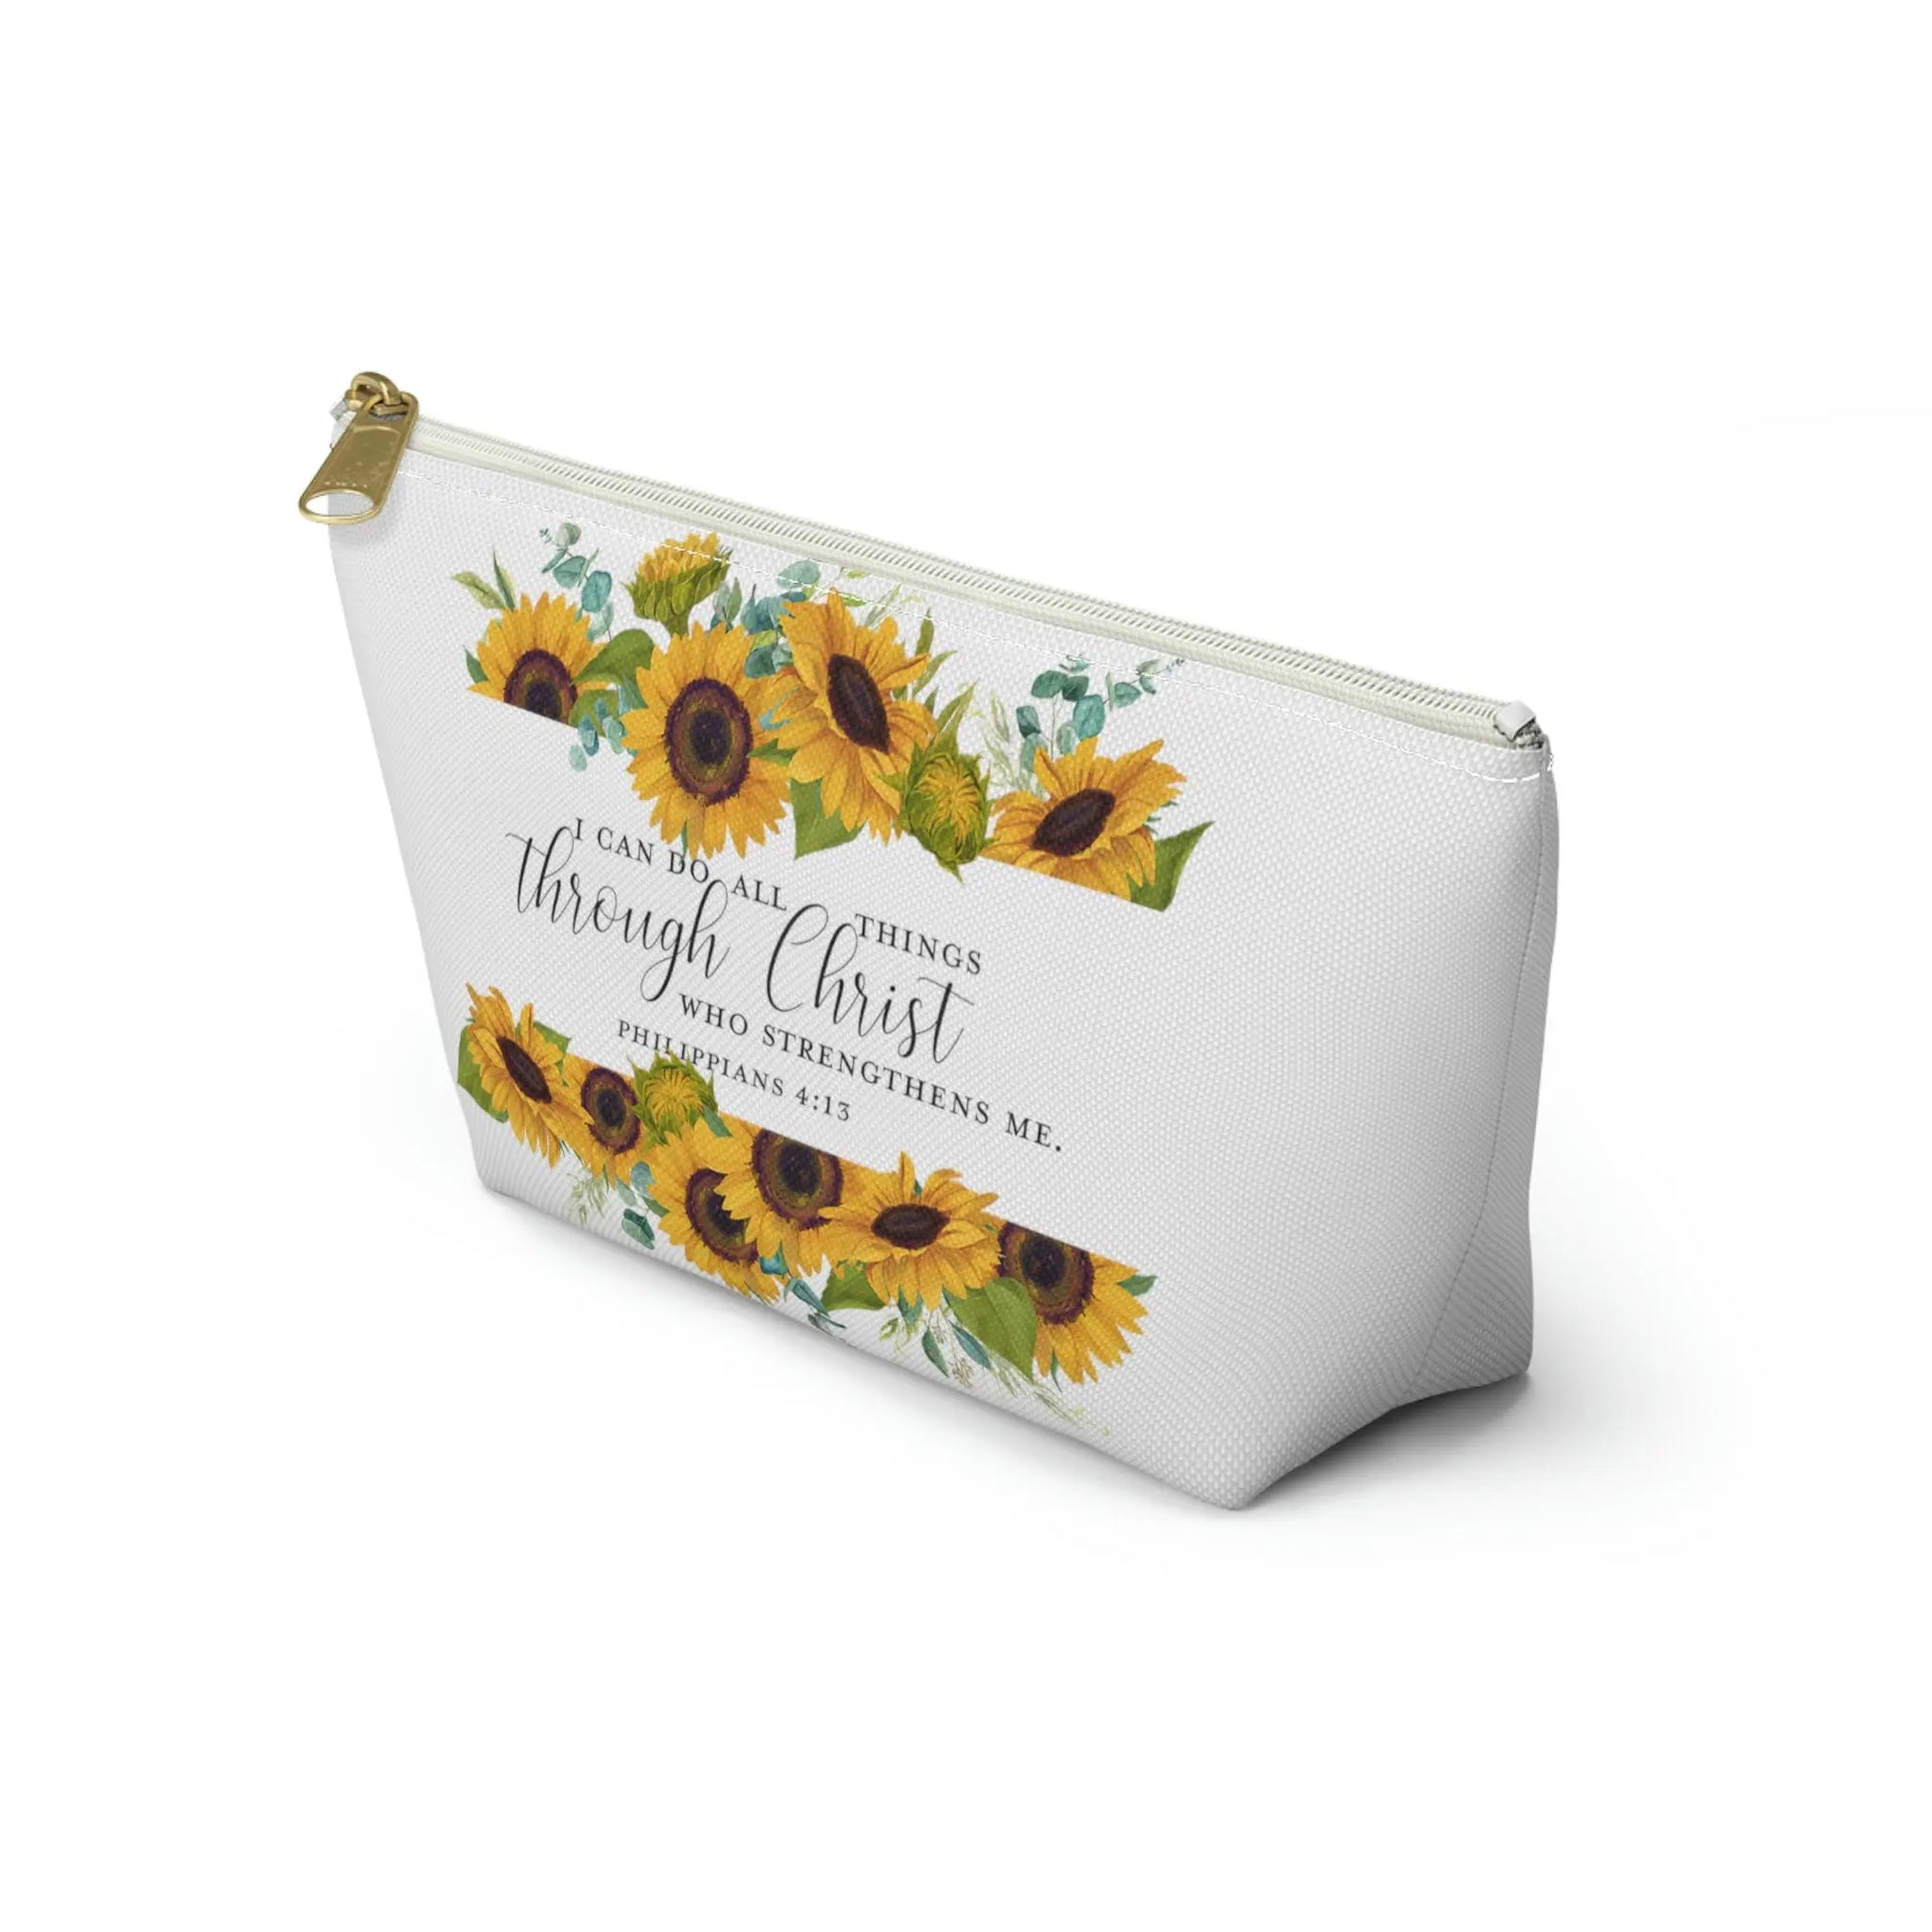 I Can Do All Things Through Christ Makeup Accessory Pouch w T-bottom - Sunflowers Printify